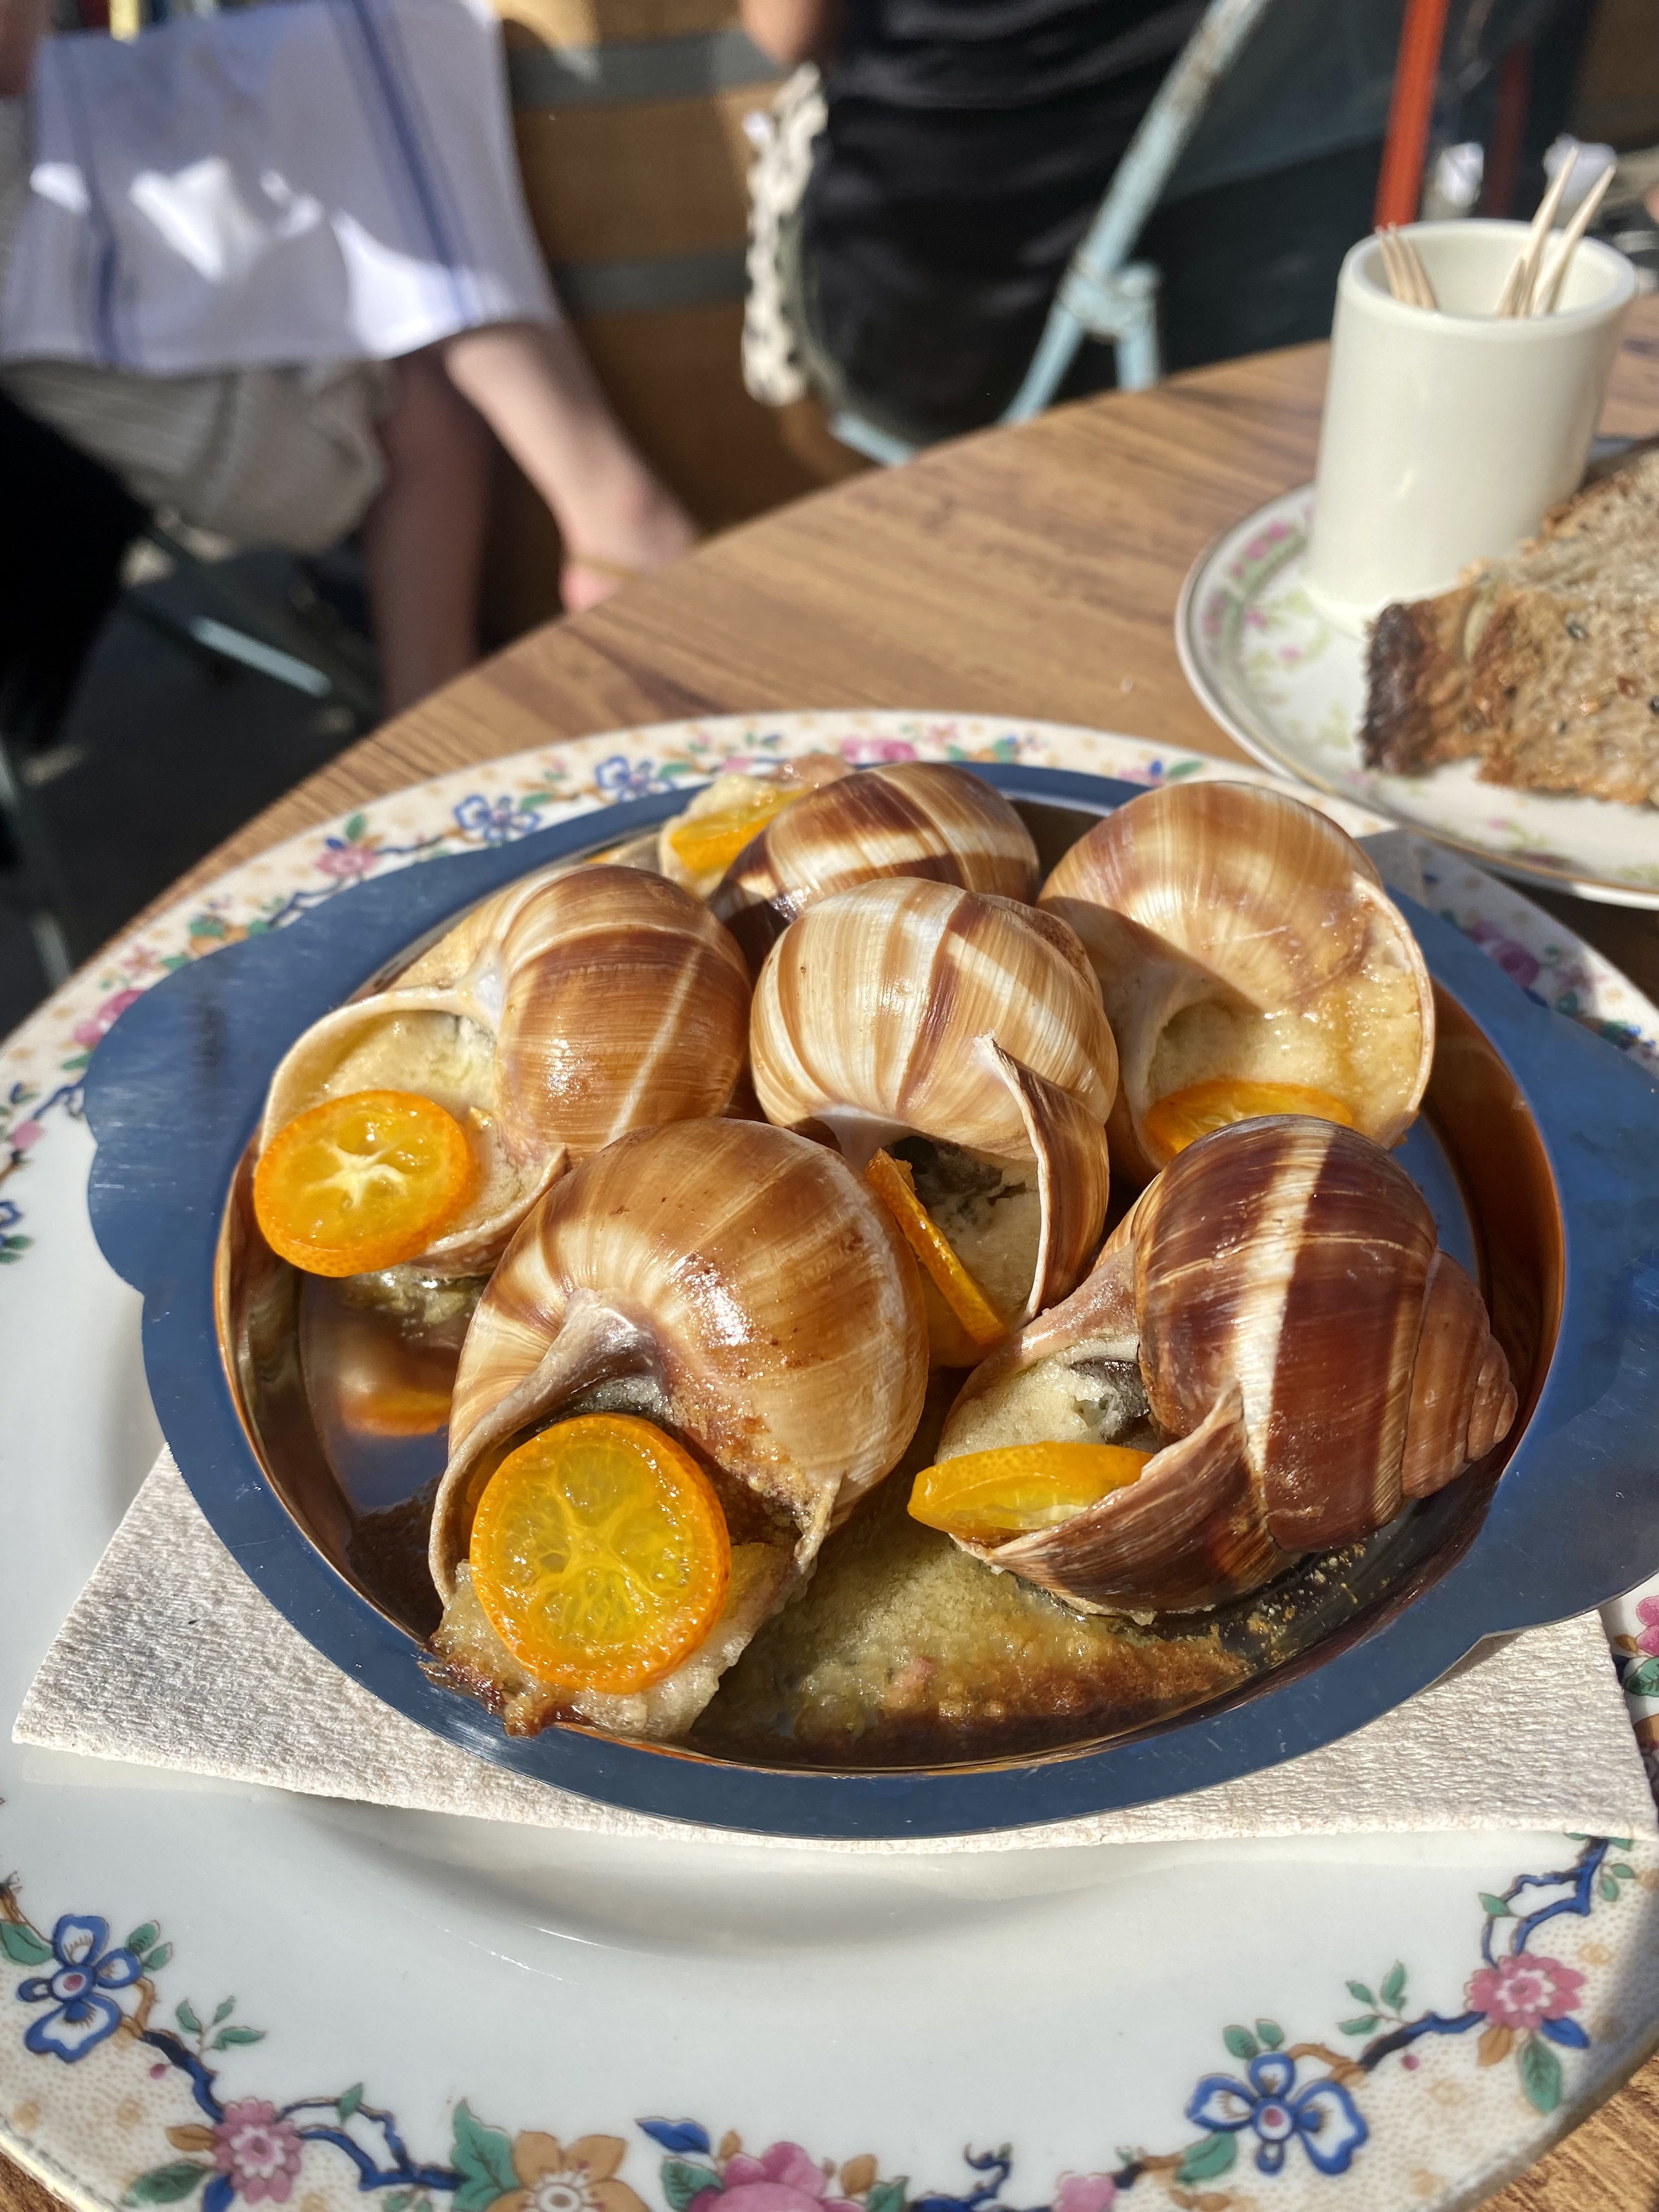 A plate of snail shells filled with escargot and kumquat.